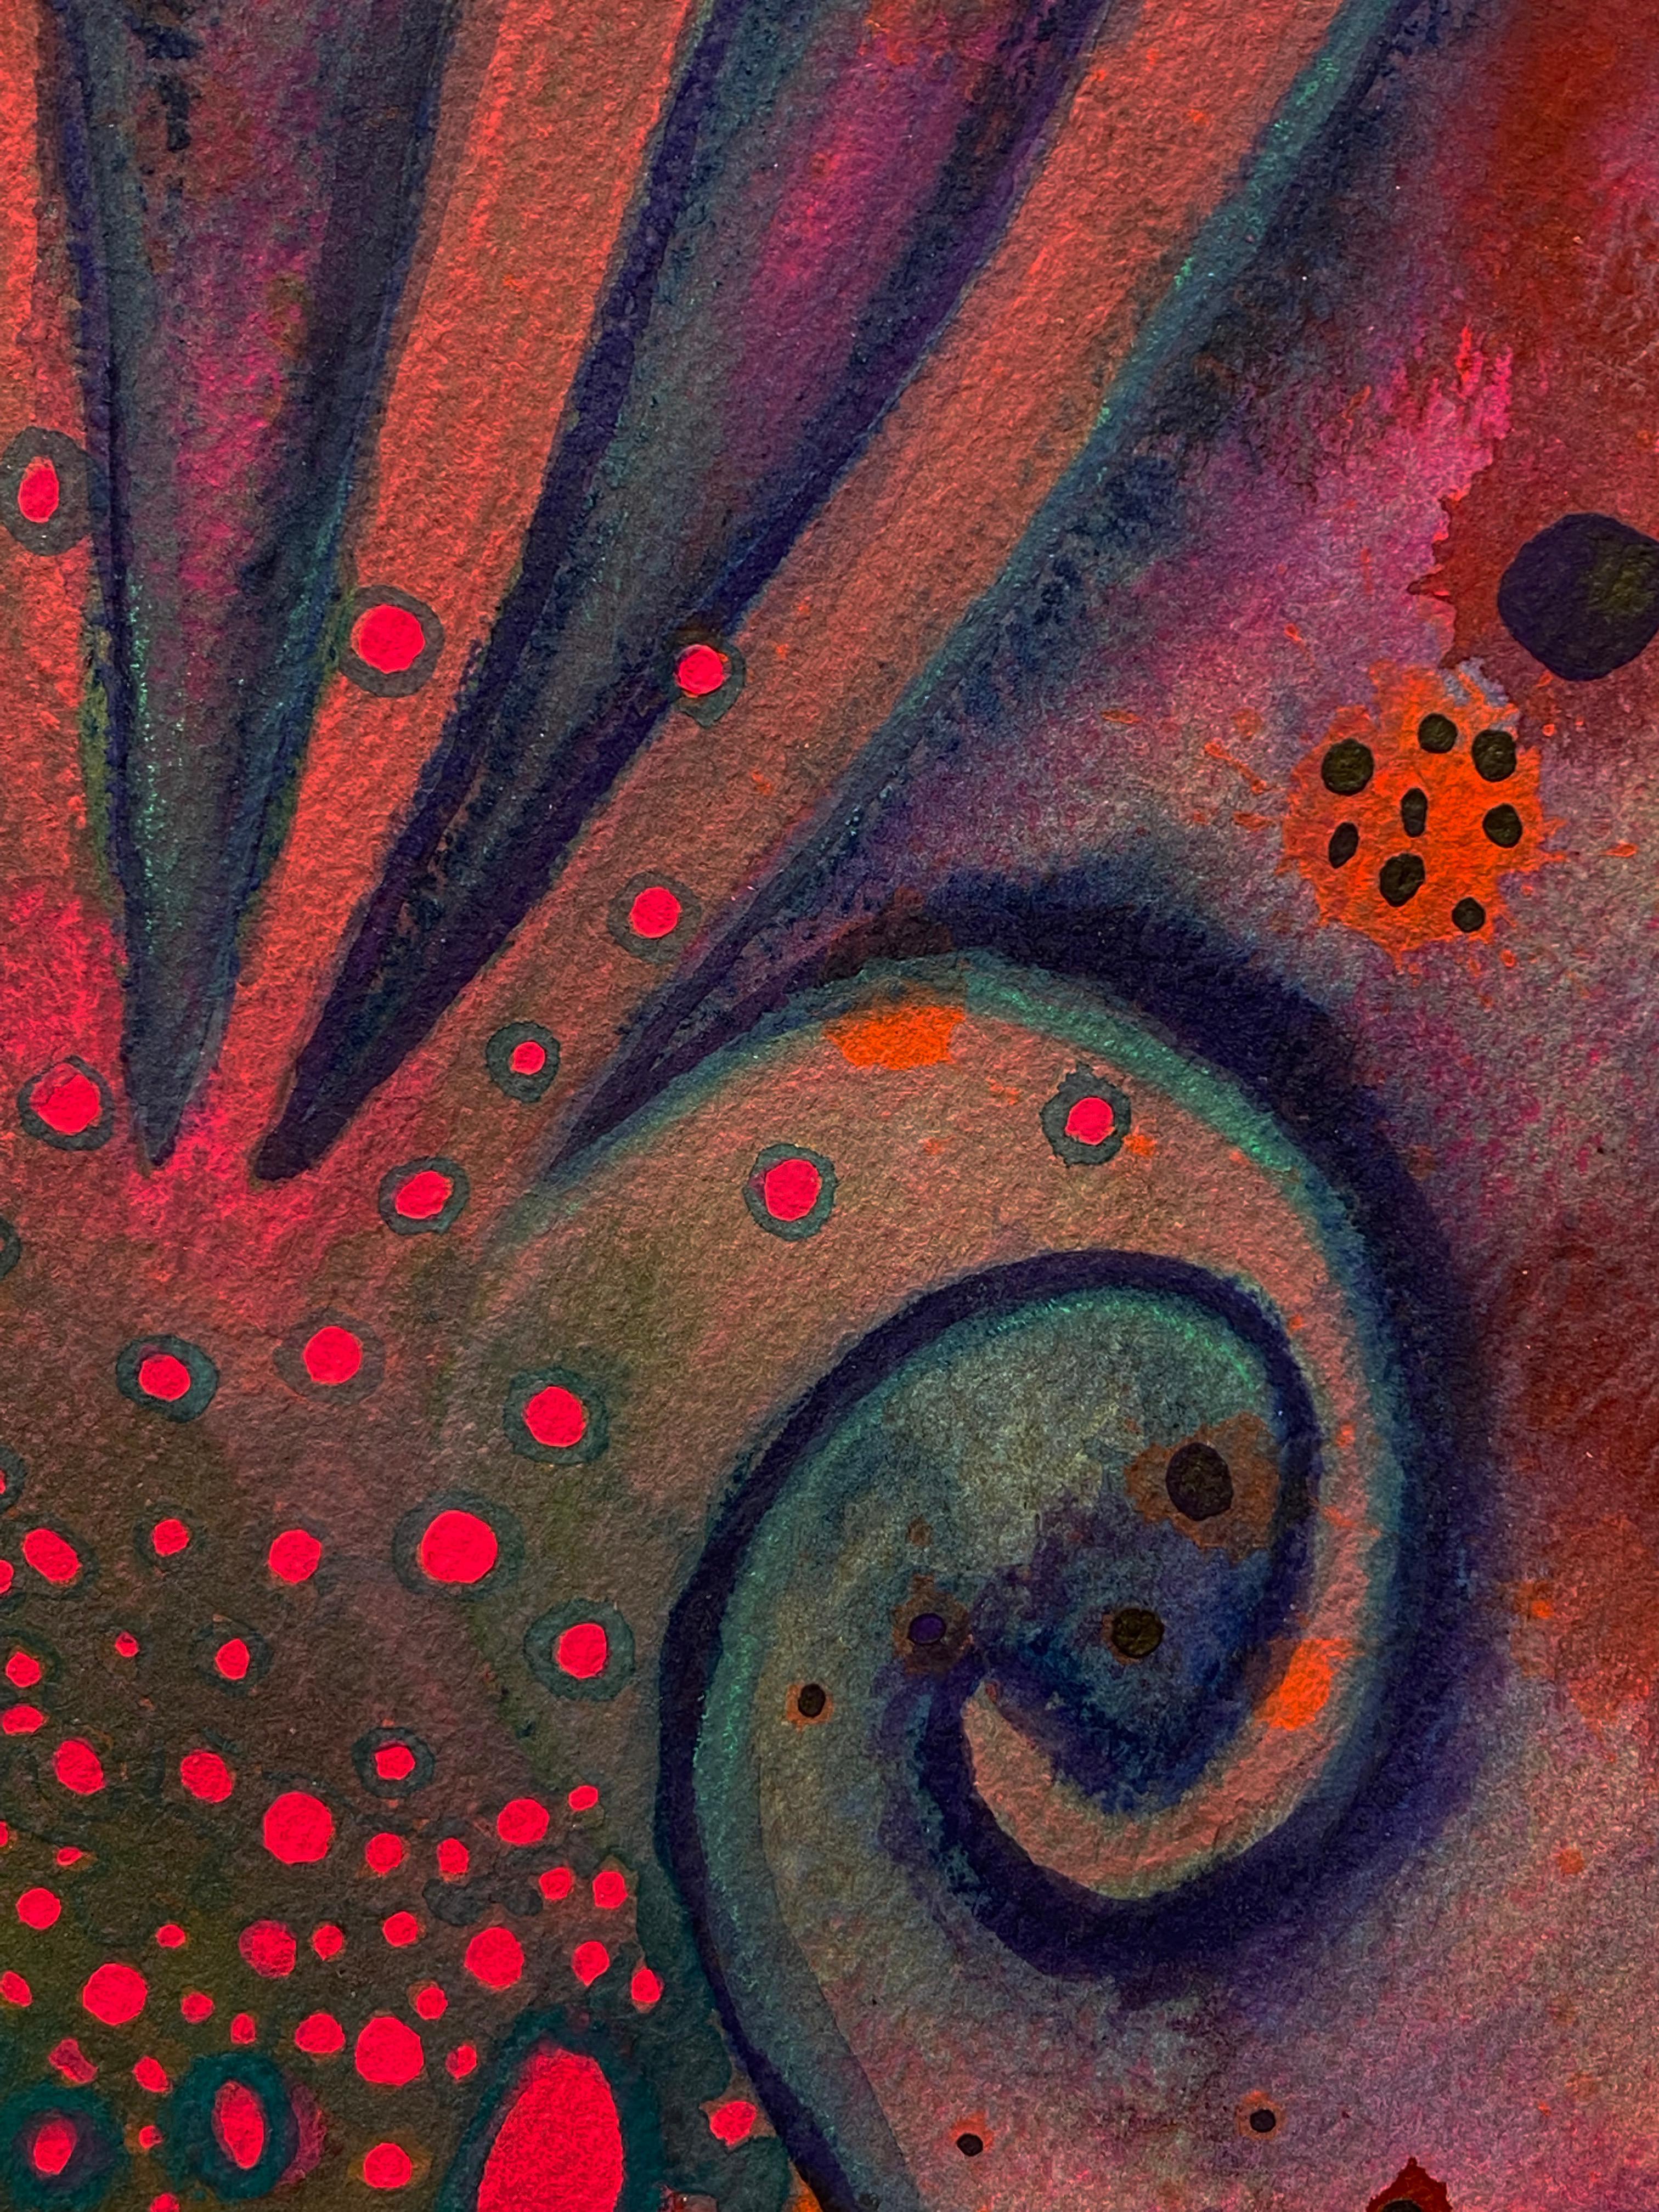 Vivid pink and magenta octopus painting / drawing by Denise Sfraga - Brooding 5 For Sale 1